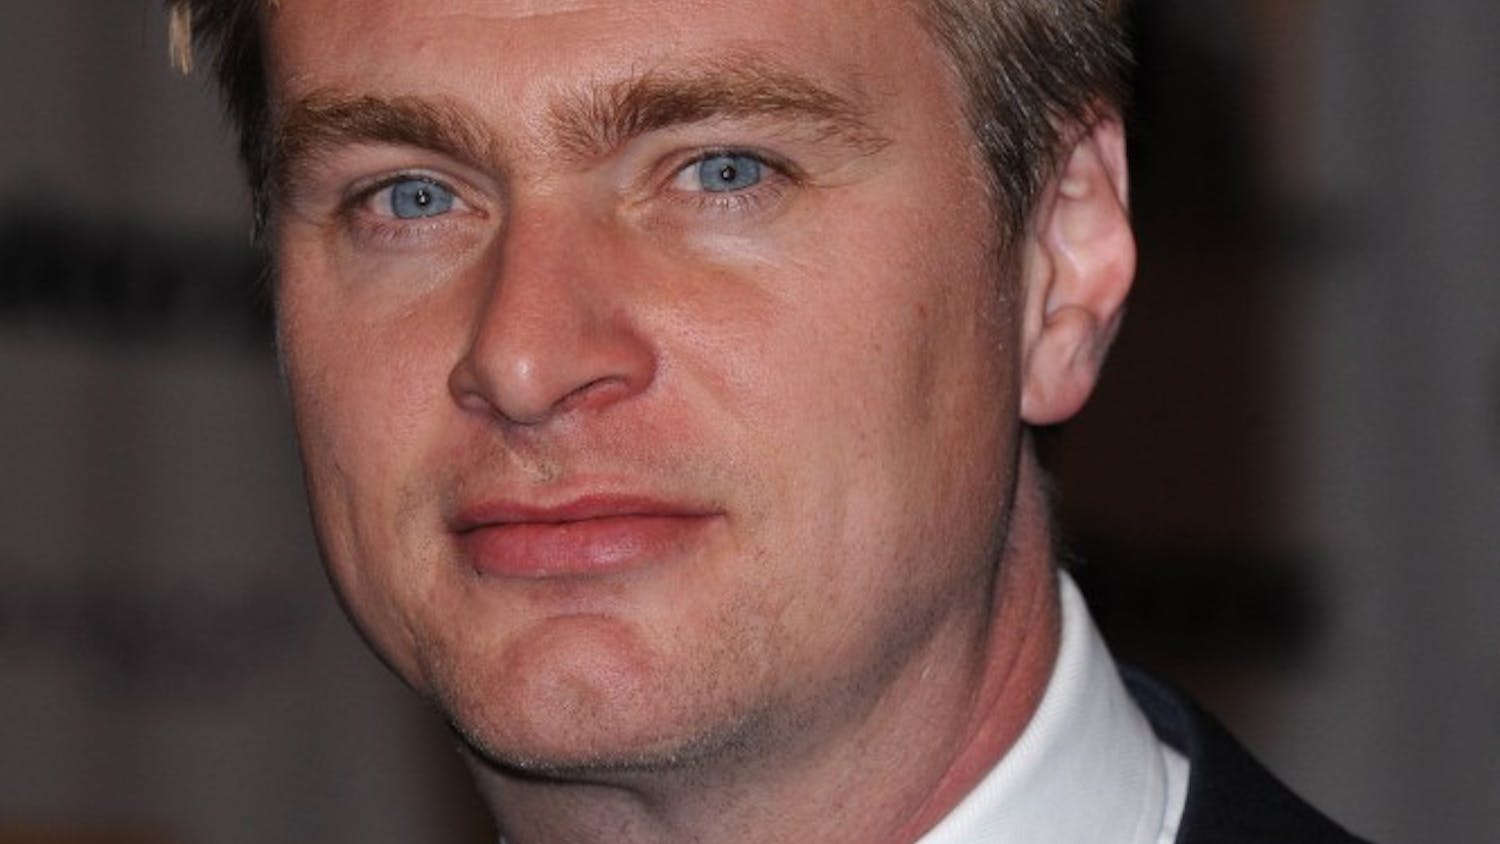 In this October 27, 2008 photograph, director Christopher Nolan attends the 12th Annual Hollywood Film Festival's Awards Gala held at the Beverly Hilton Hotel in Los Angeles, California. Nolan